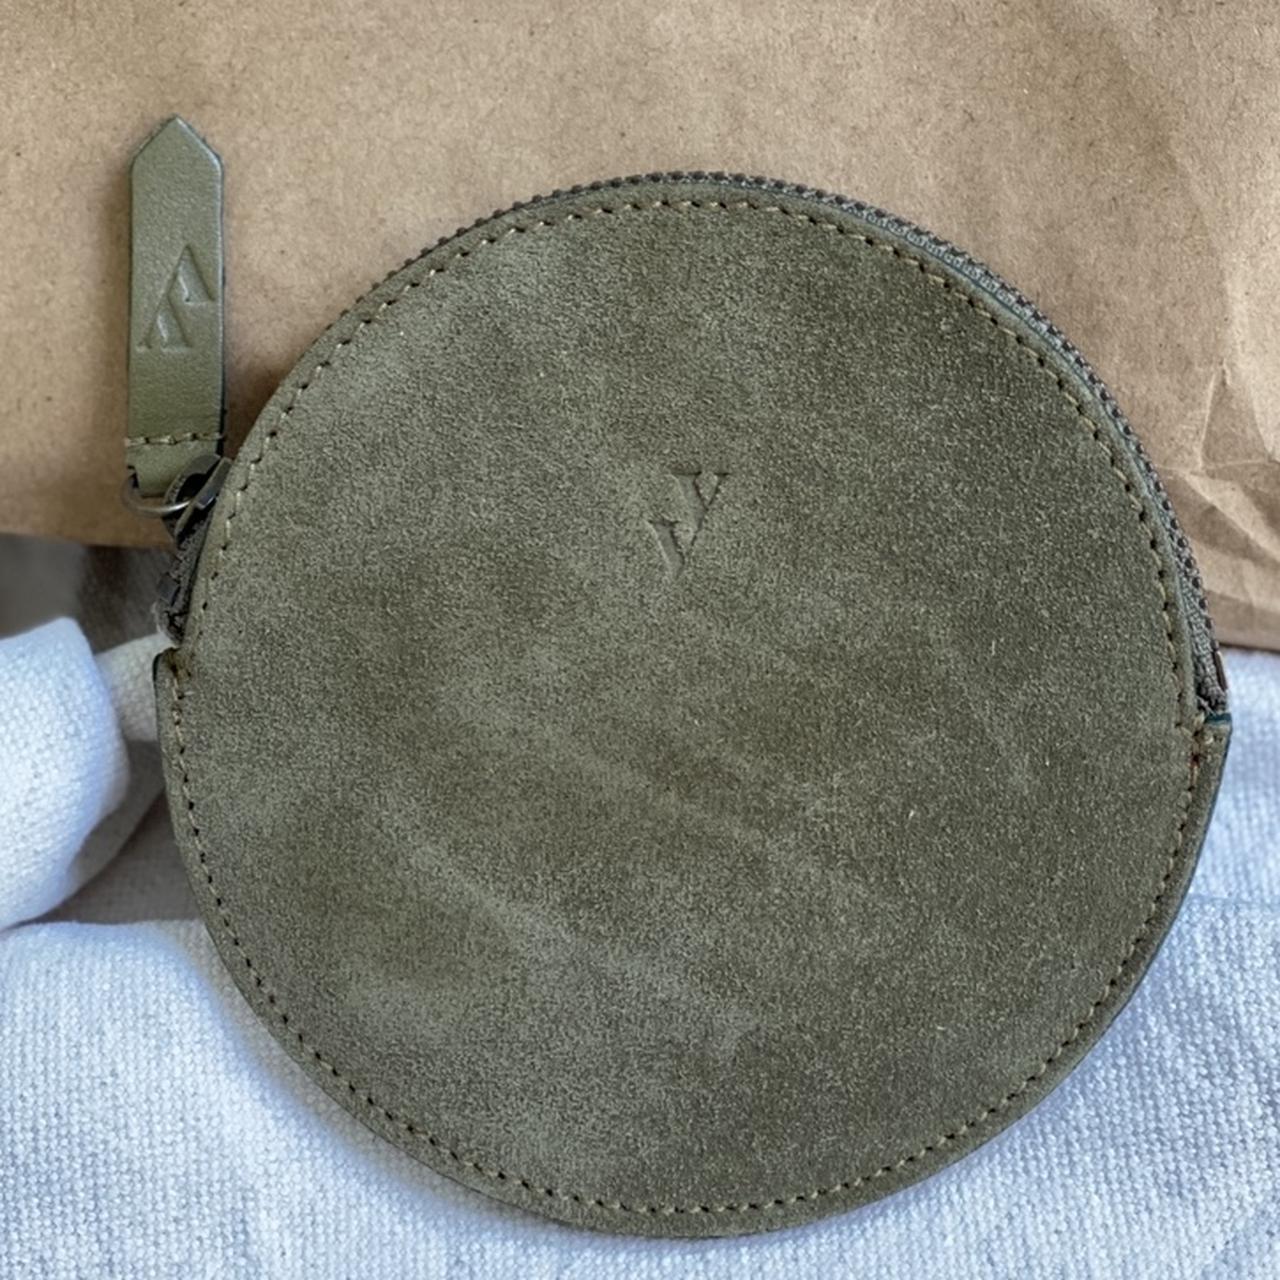 Product Image 1 - VEREVERTO Moon suede coin purse.
Round